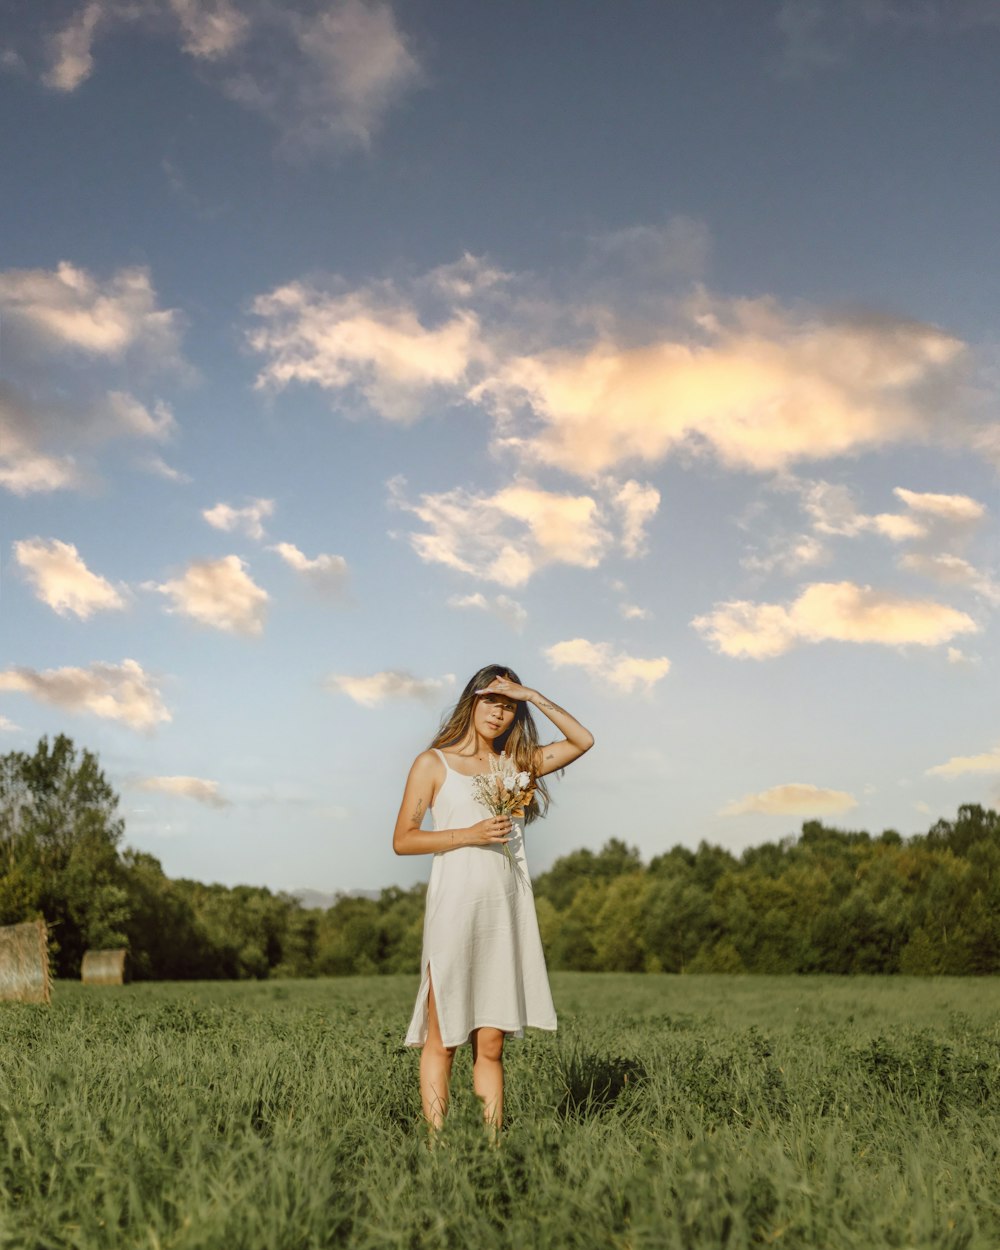 woman in white dress standing on green grass field under blue and white cloudy sky during